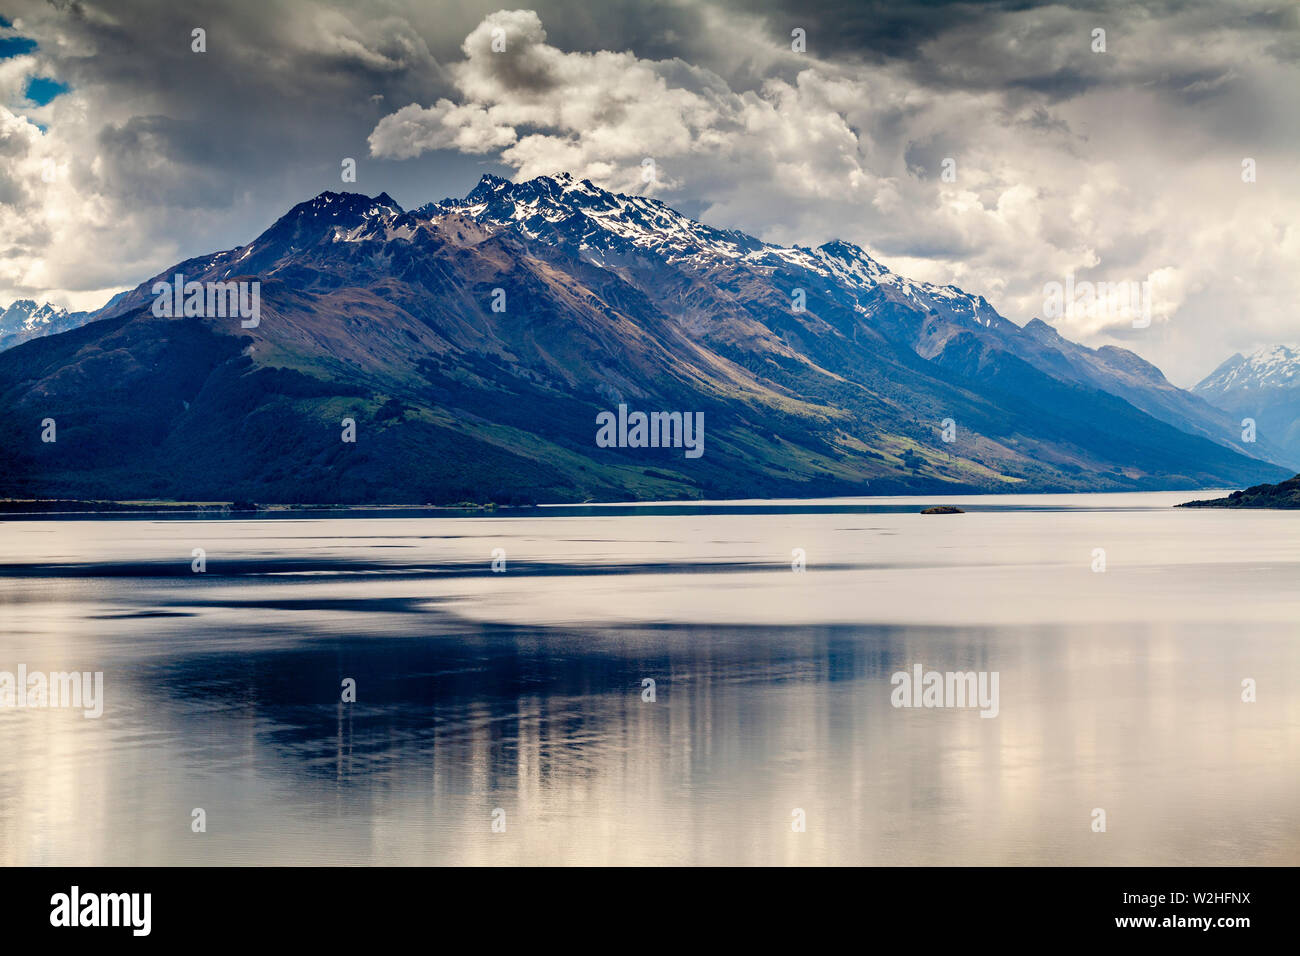 Lake Wakatipu and Mountain Scenery On The Queenstown to Glenorchy Road, South Island, New Zealand Stock Photo